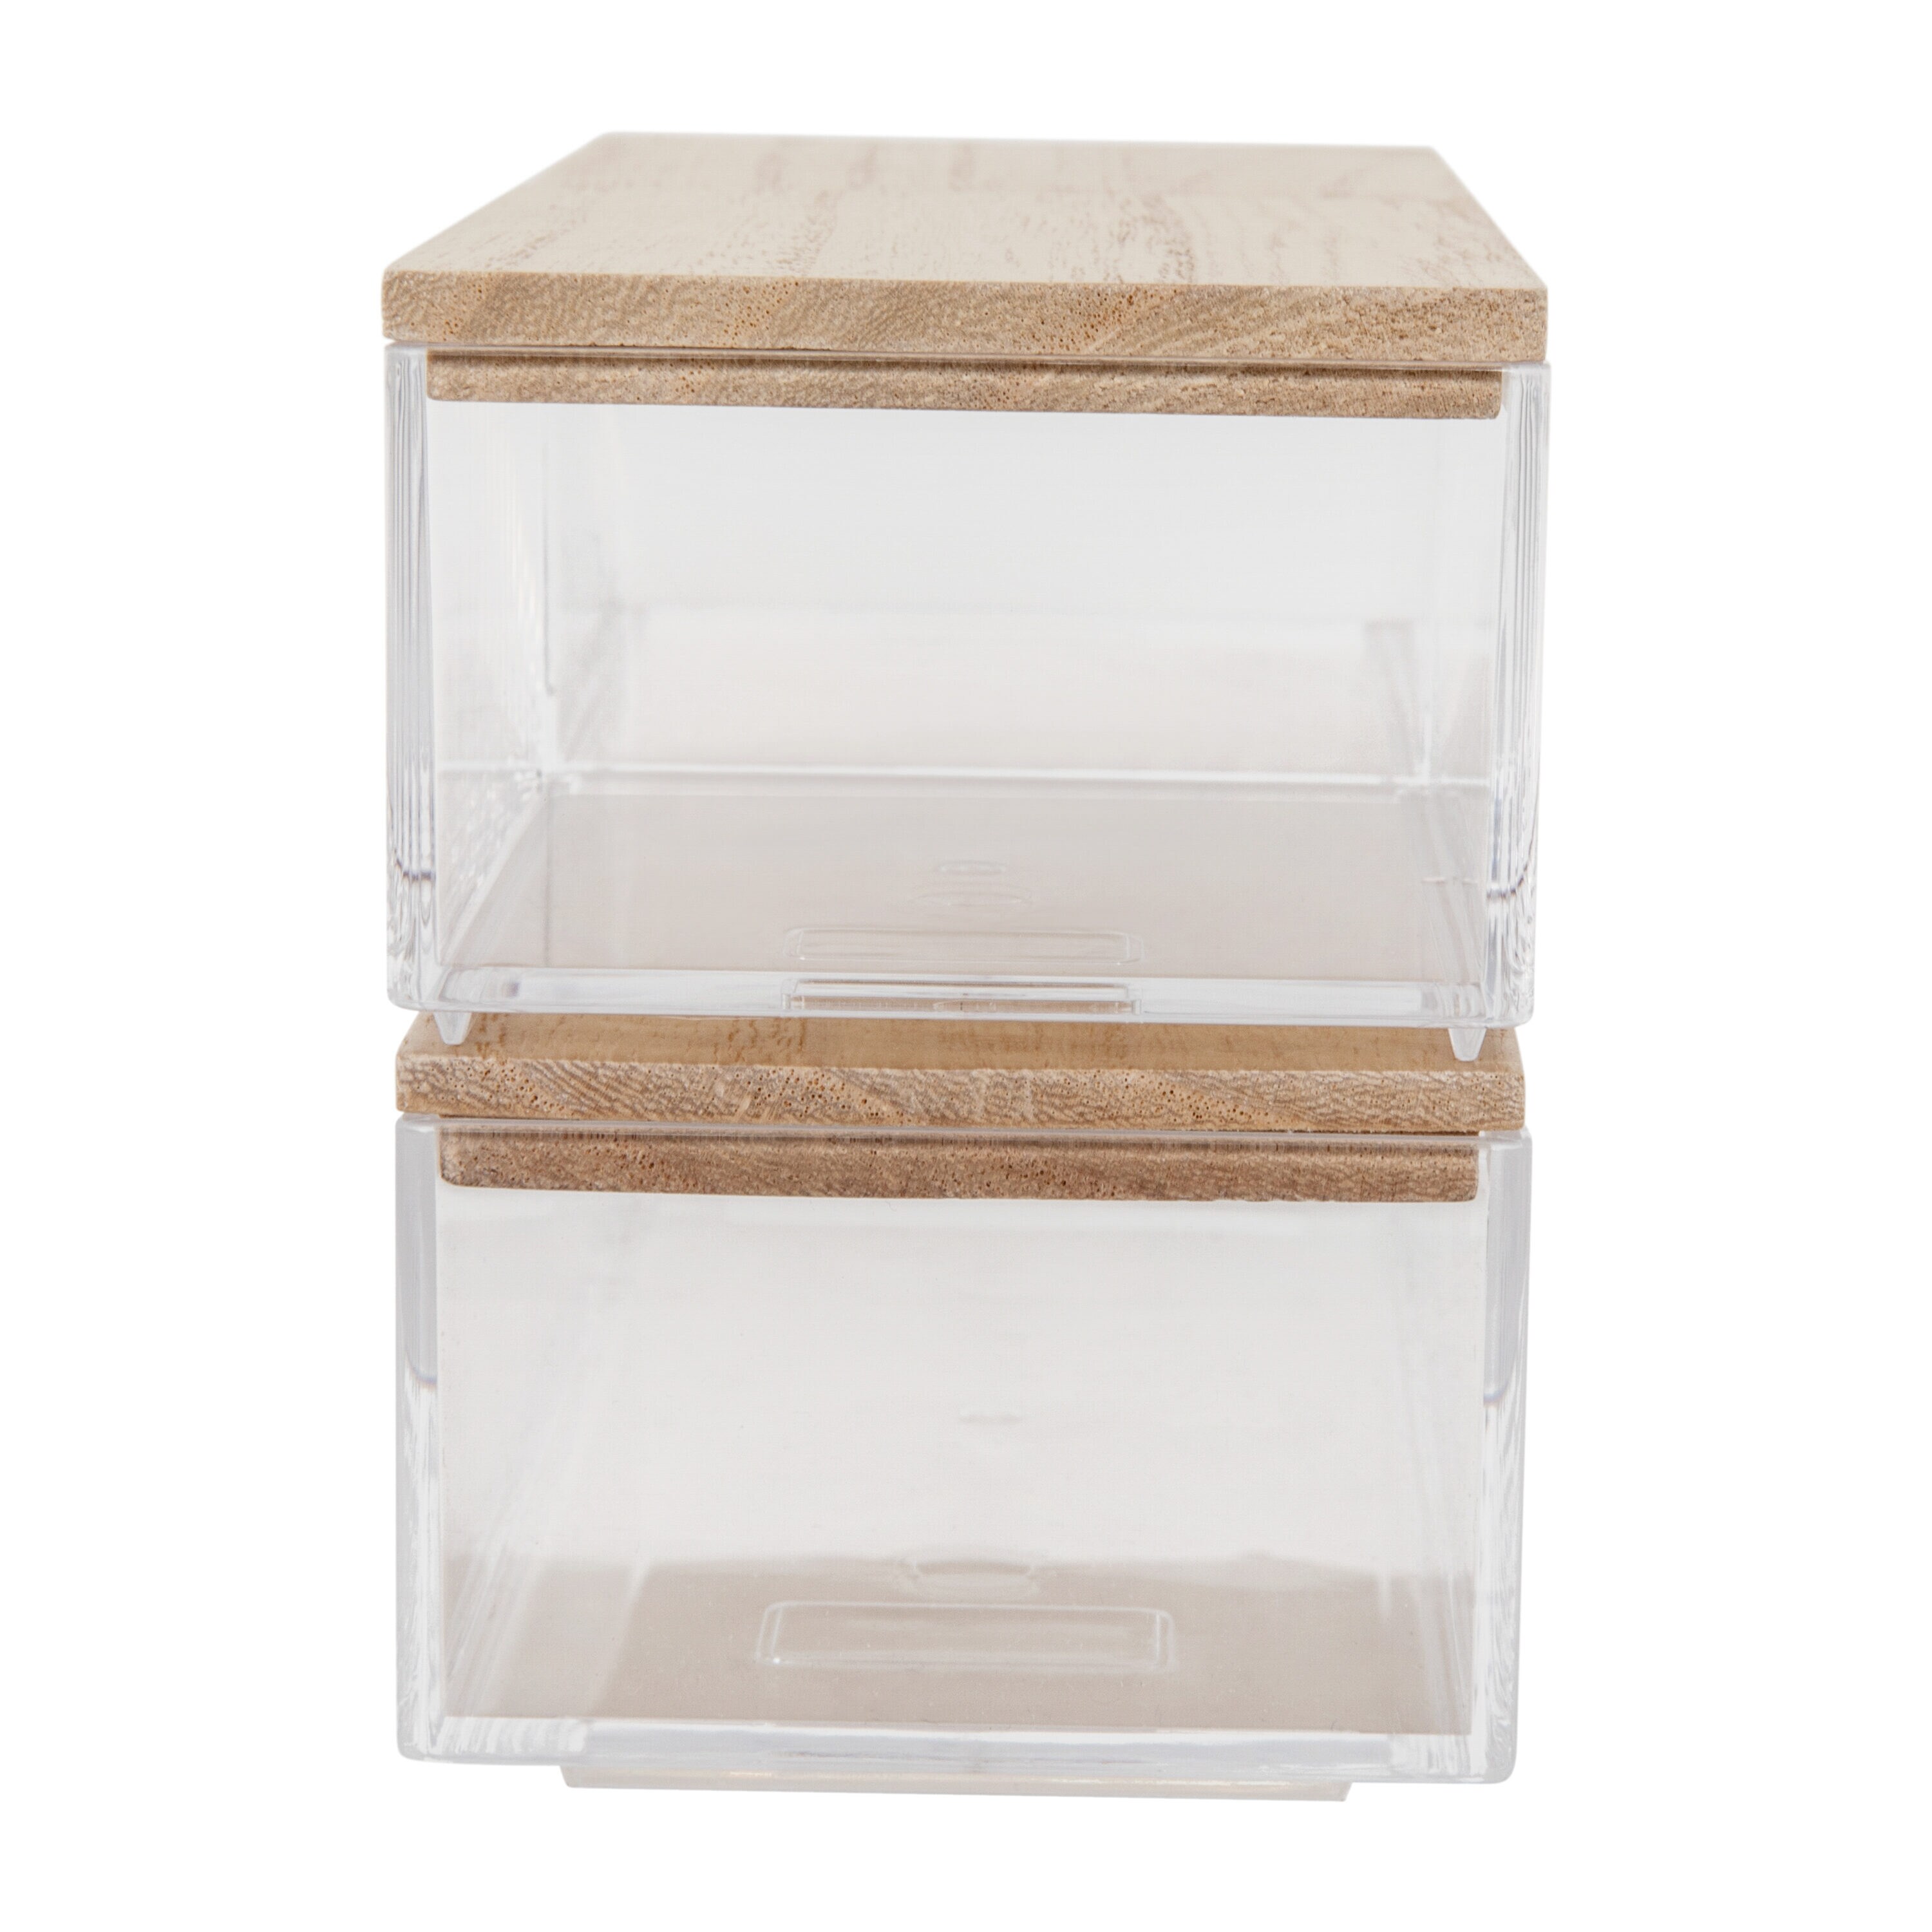 Martha Stewart Set of 3 Wooden Storage Boxes with Pullout Drawers - Light Natural